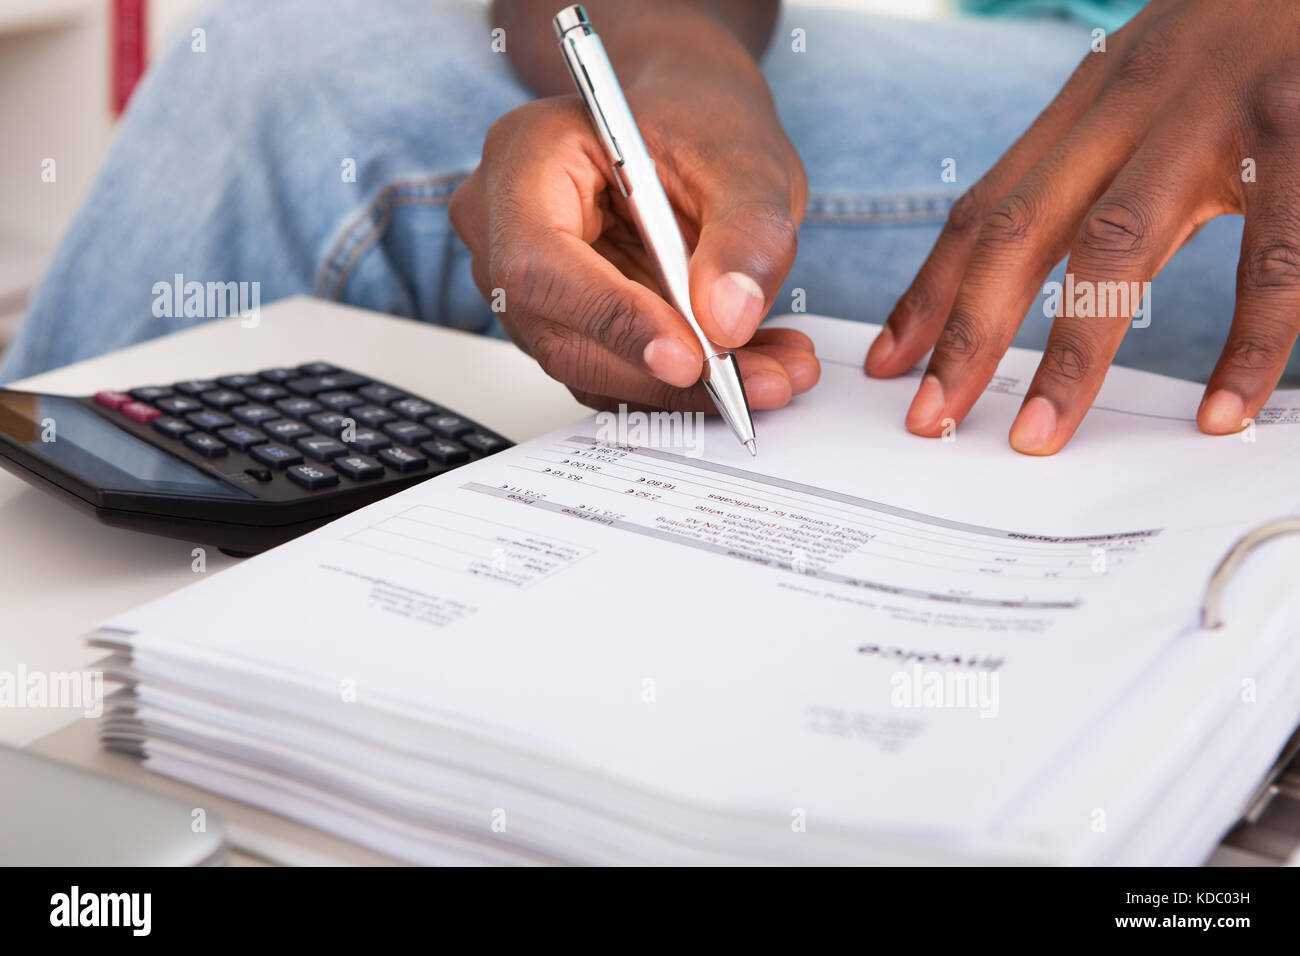 African Young Man Calculating His Finance Expenses At Home Stock Photo